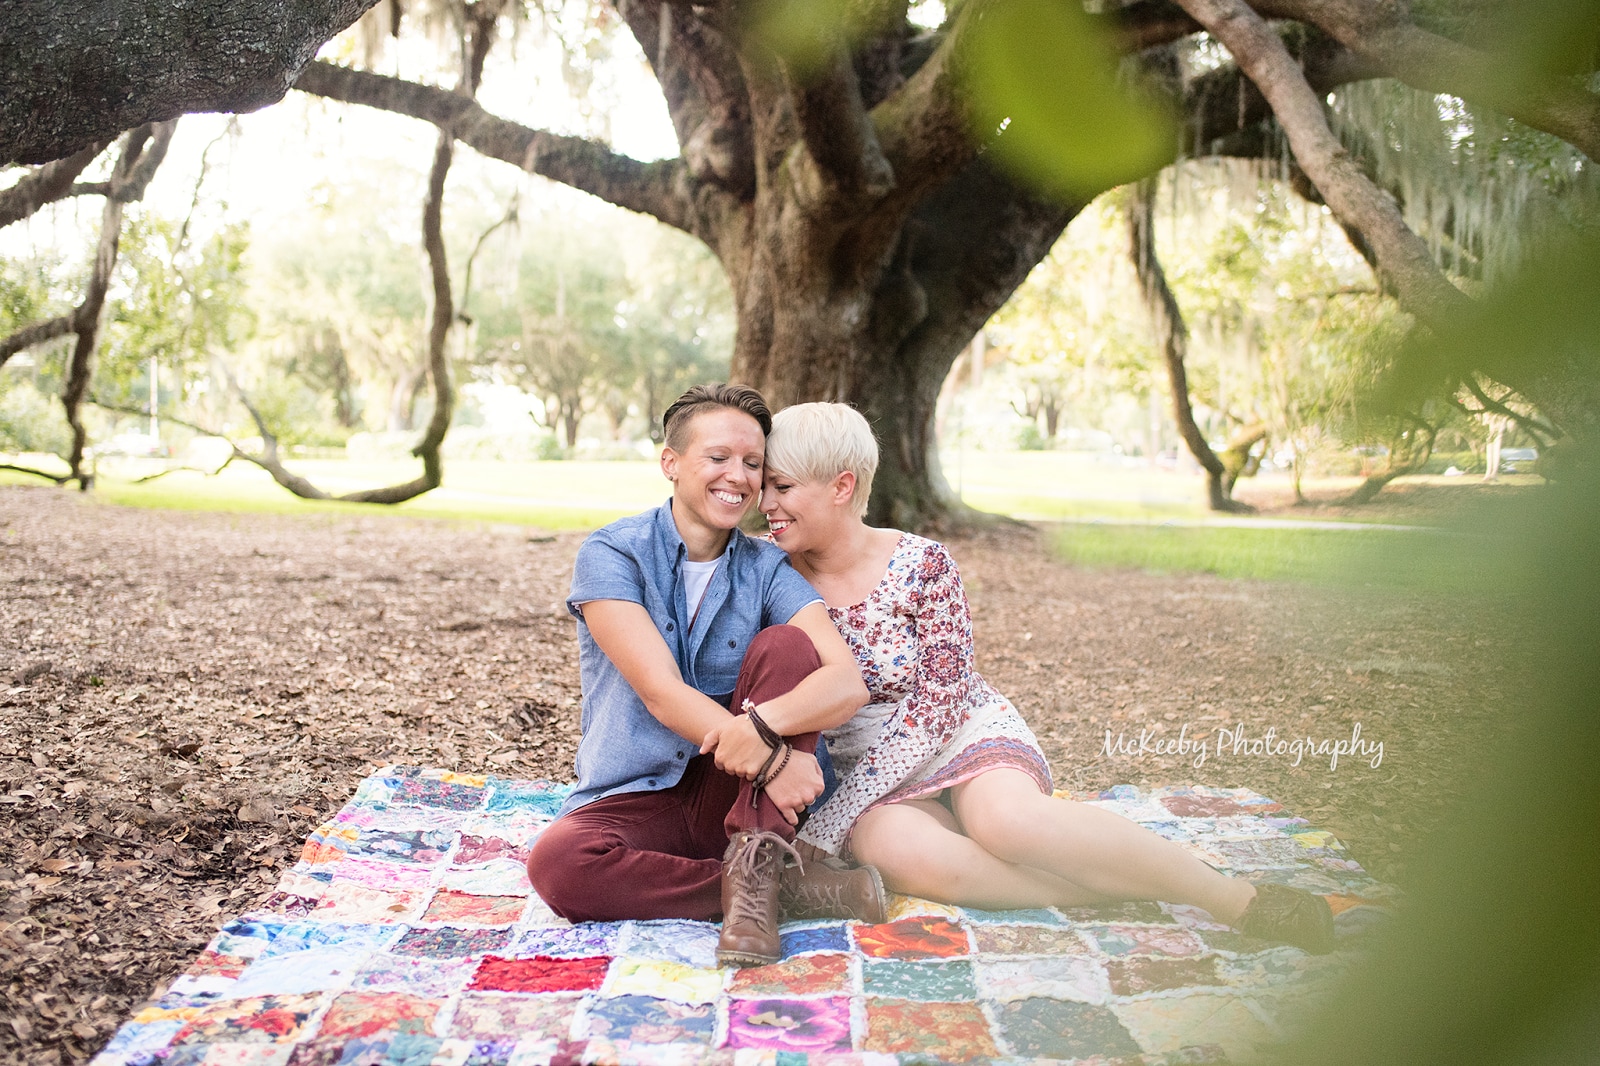 10 Great Options for Outdoor Family Photos Around Central Florida